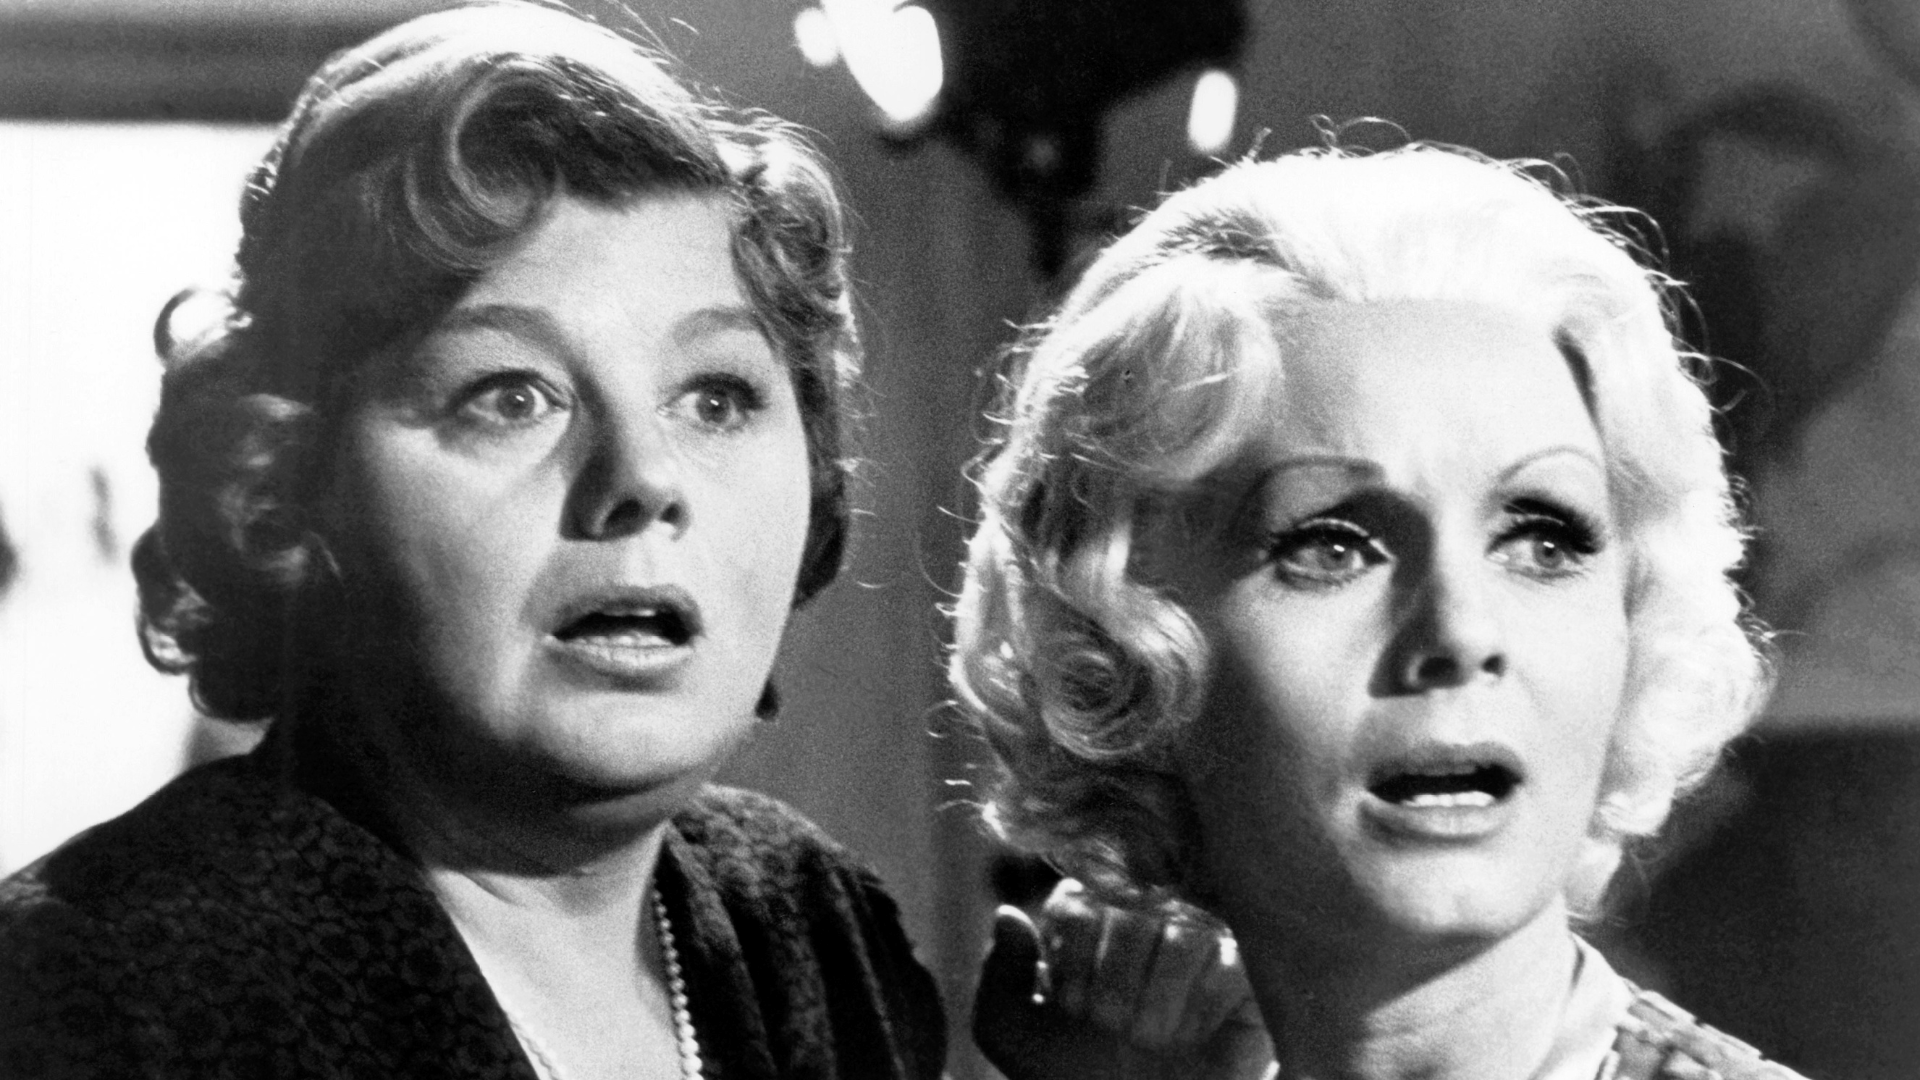 Shelley Winters and Debbie Reynolds in 'What's the Matter with Helen?'